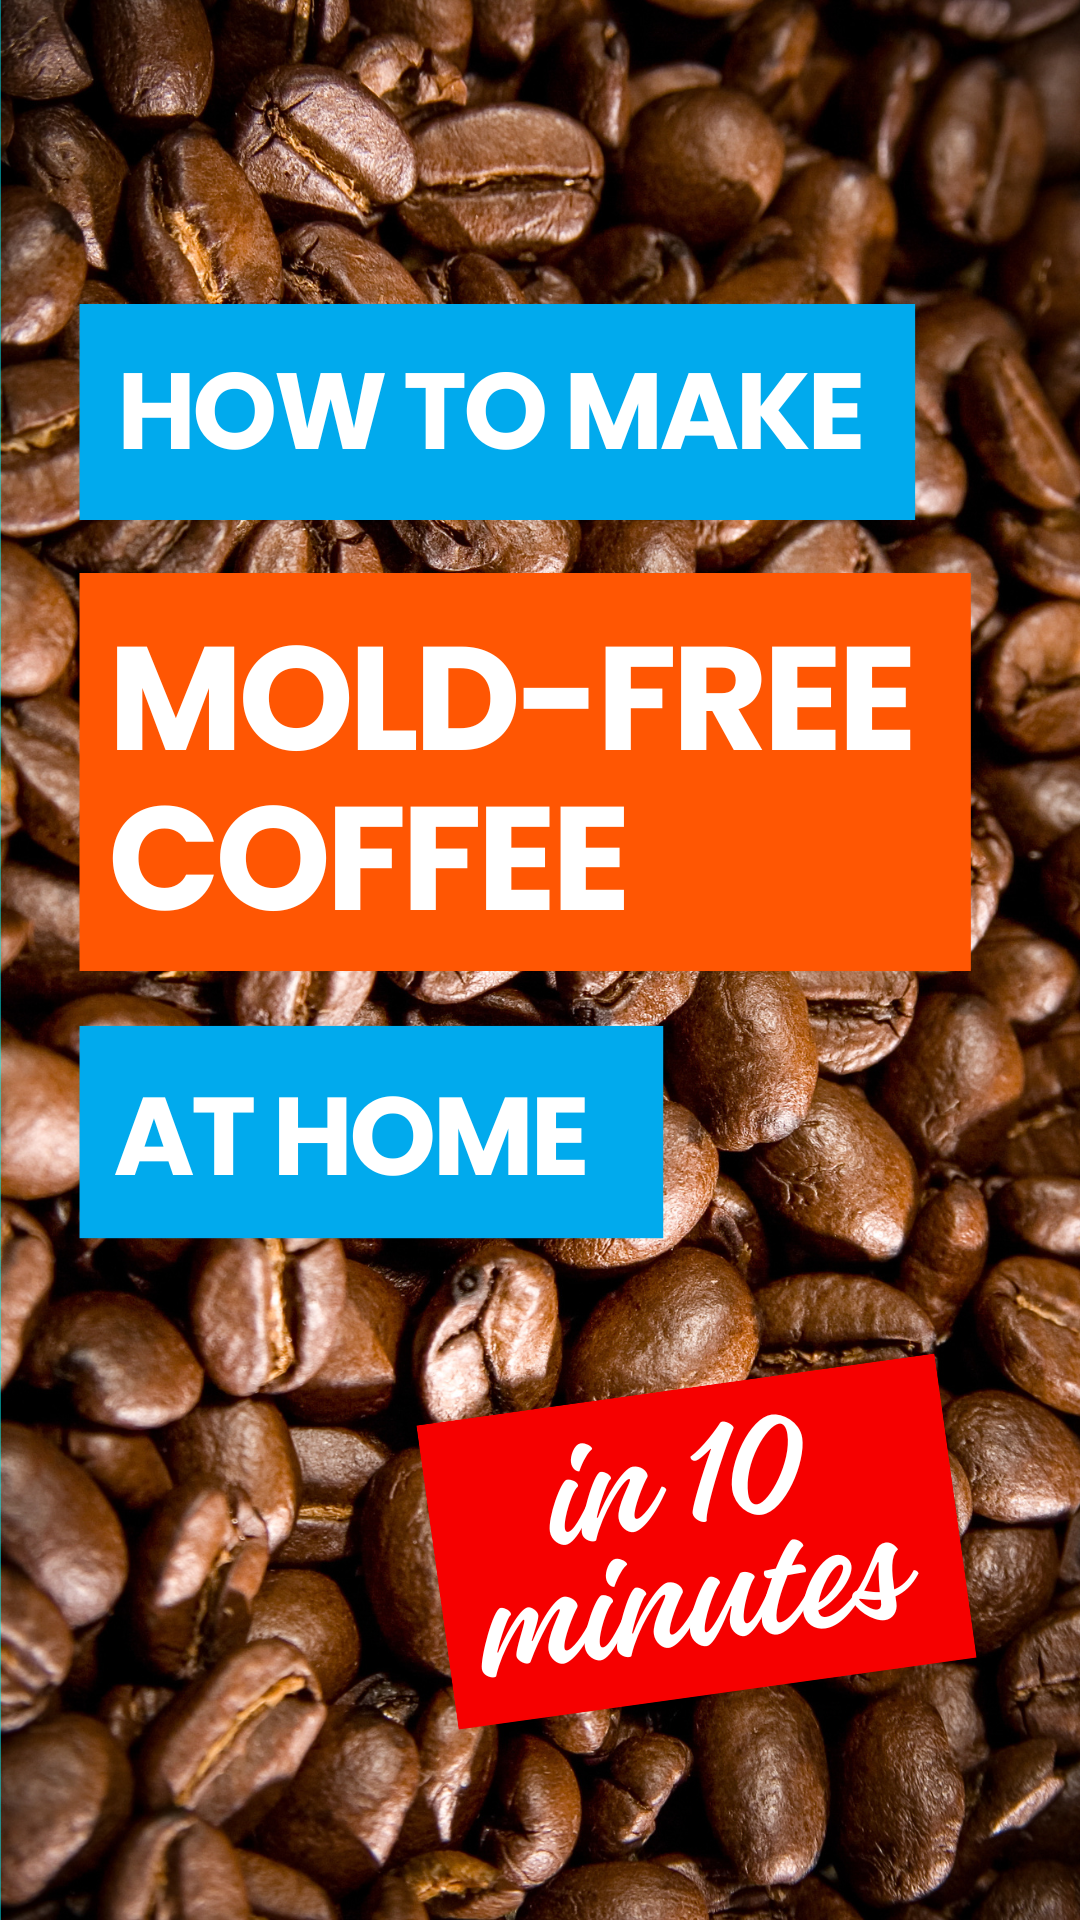 How to Make Mold-free Coffee with This Simple Trick